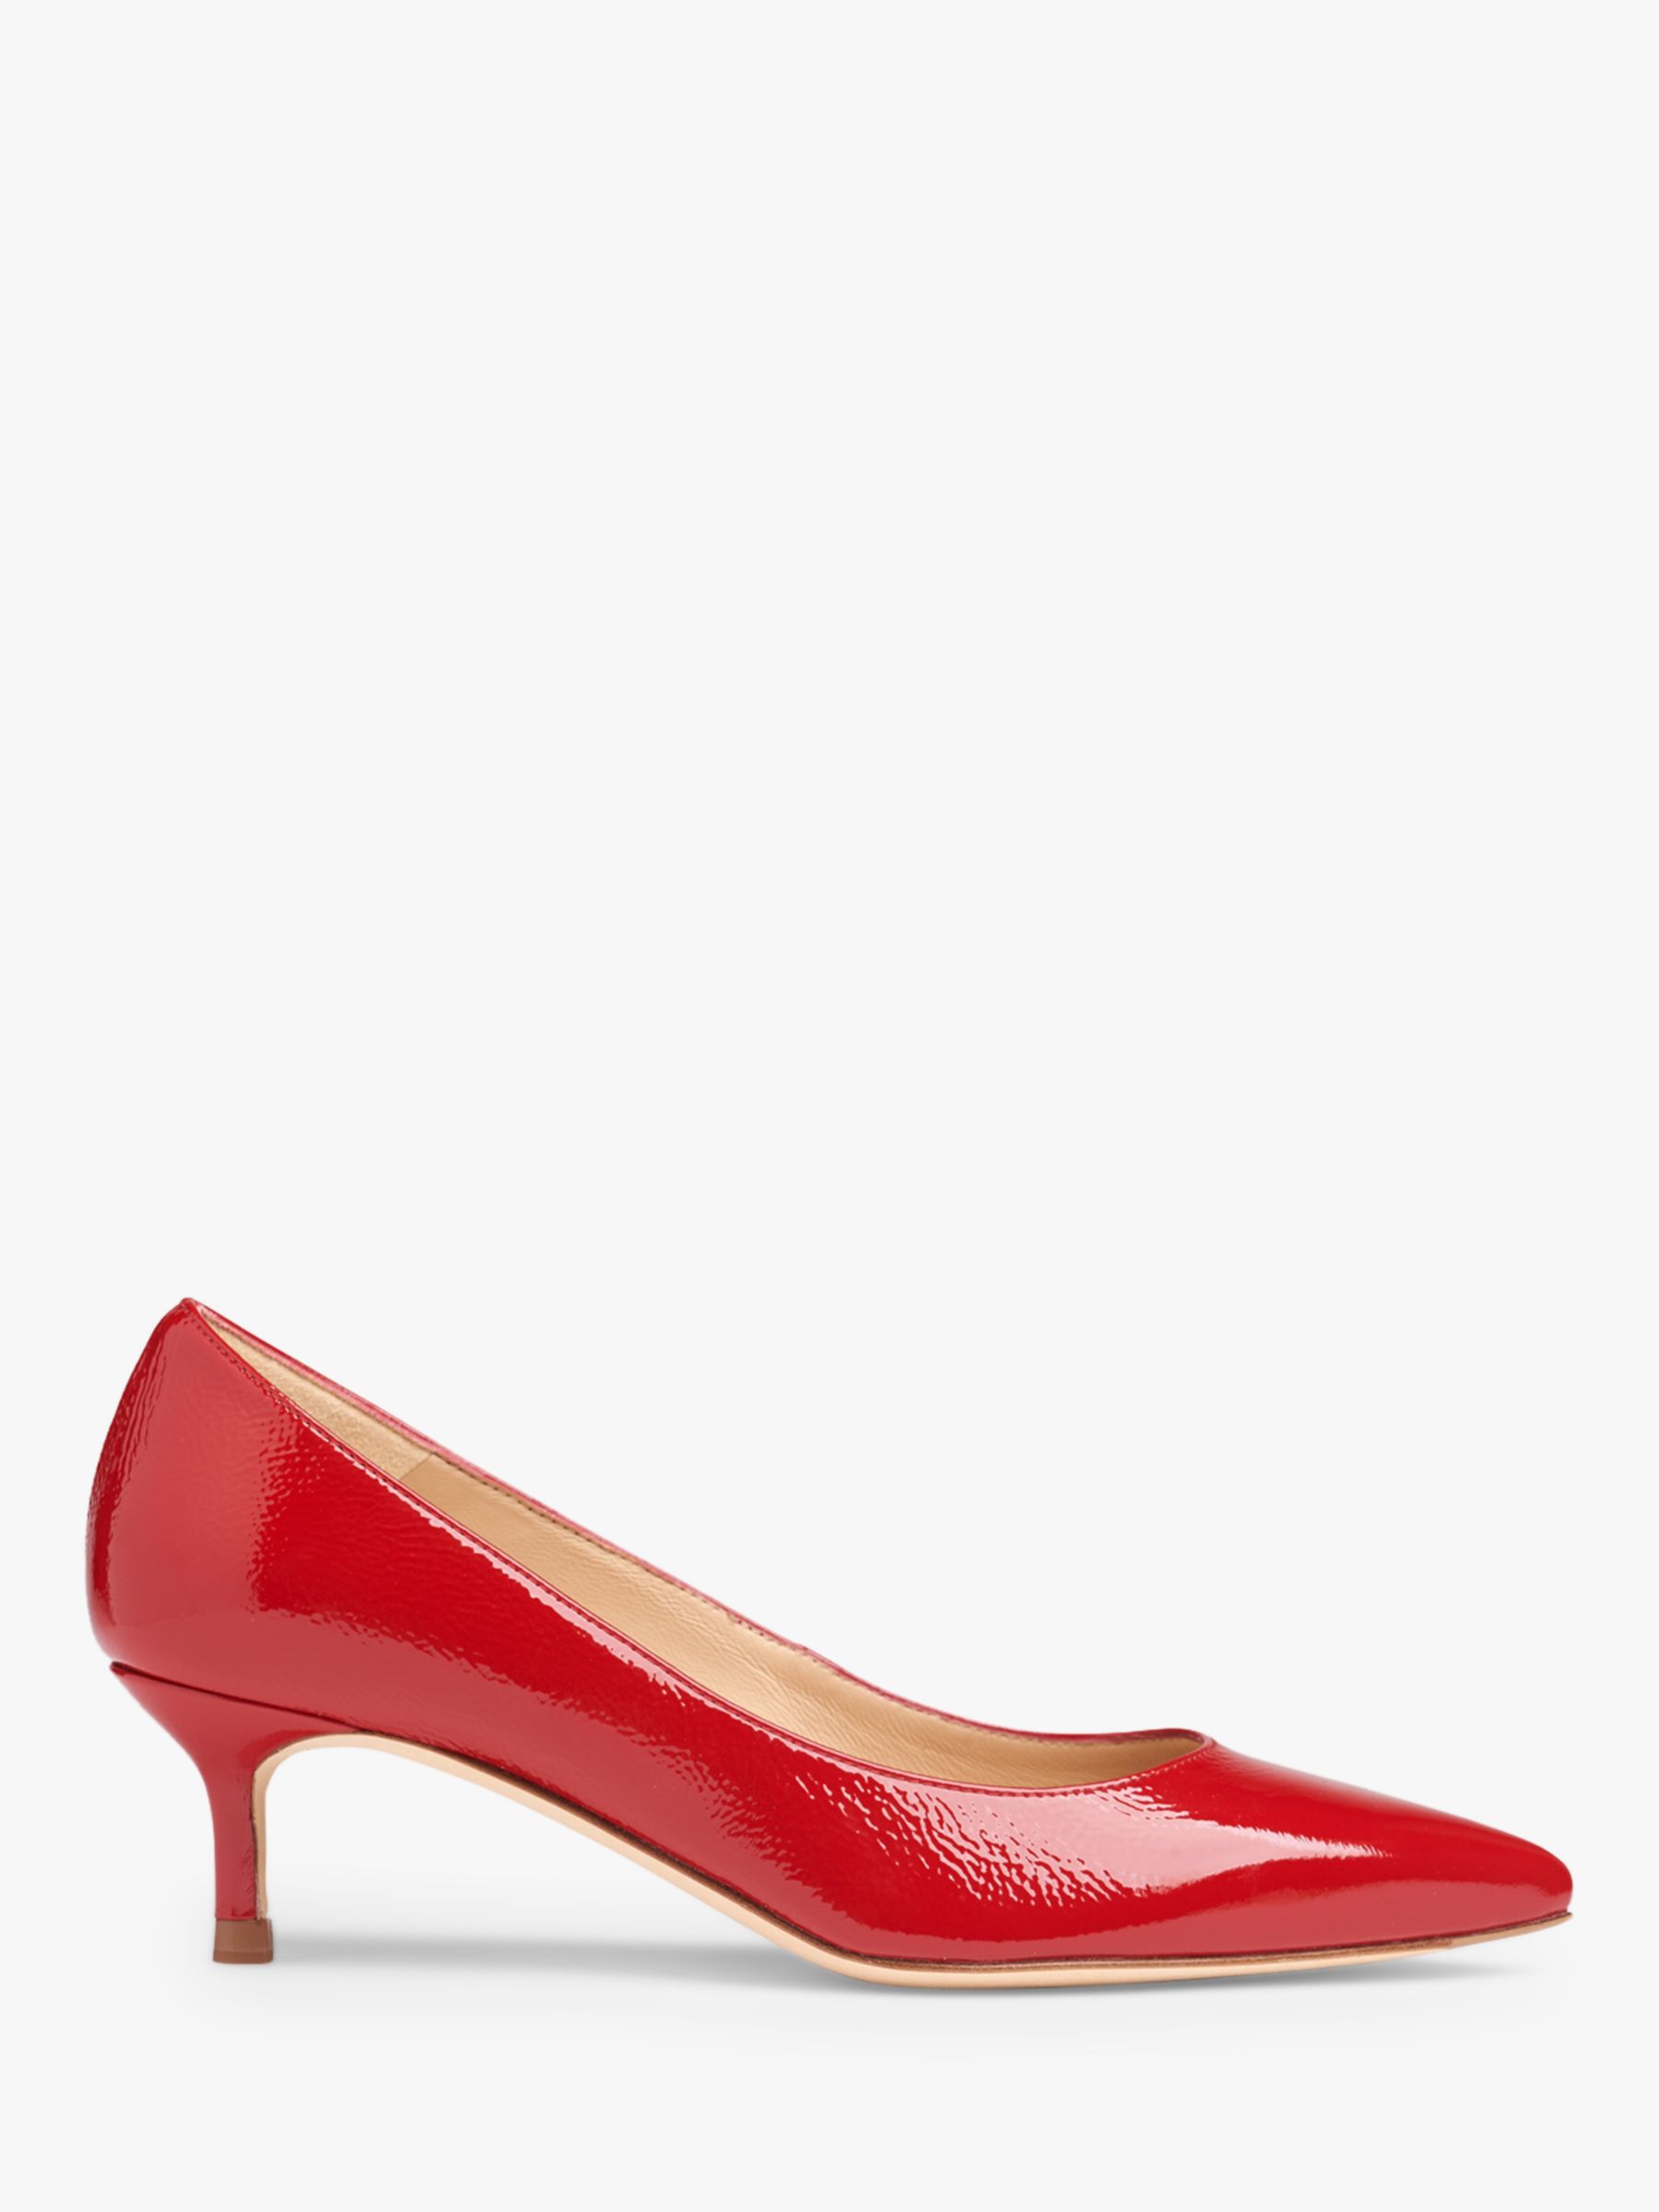 L.K.Bennett Audrey Crinkle Patent Pointed Toe Court Shoes, Bright Red at John Lewis & Partners